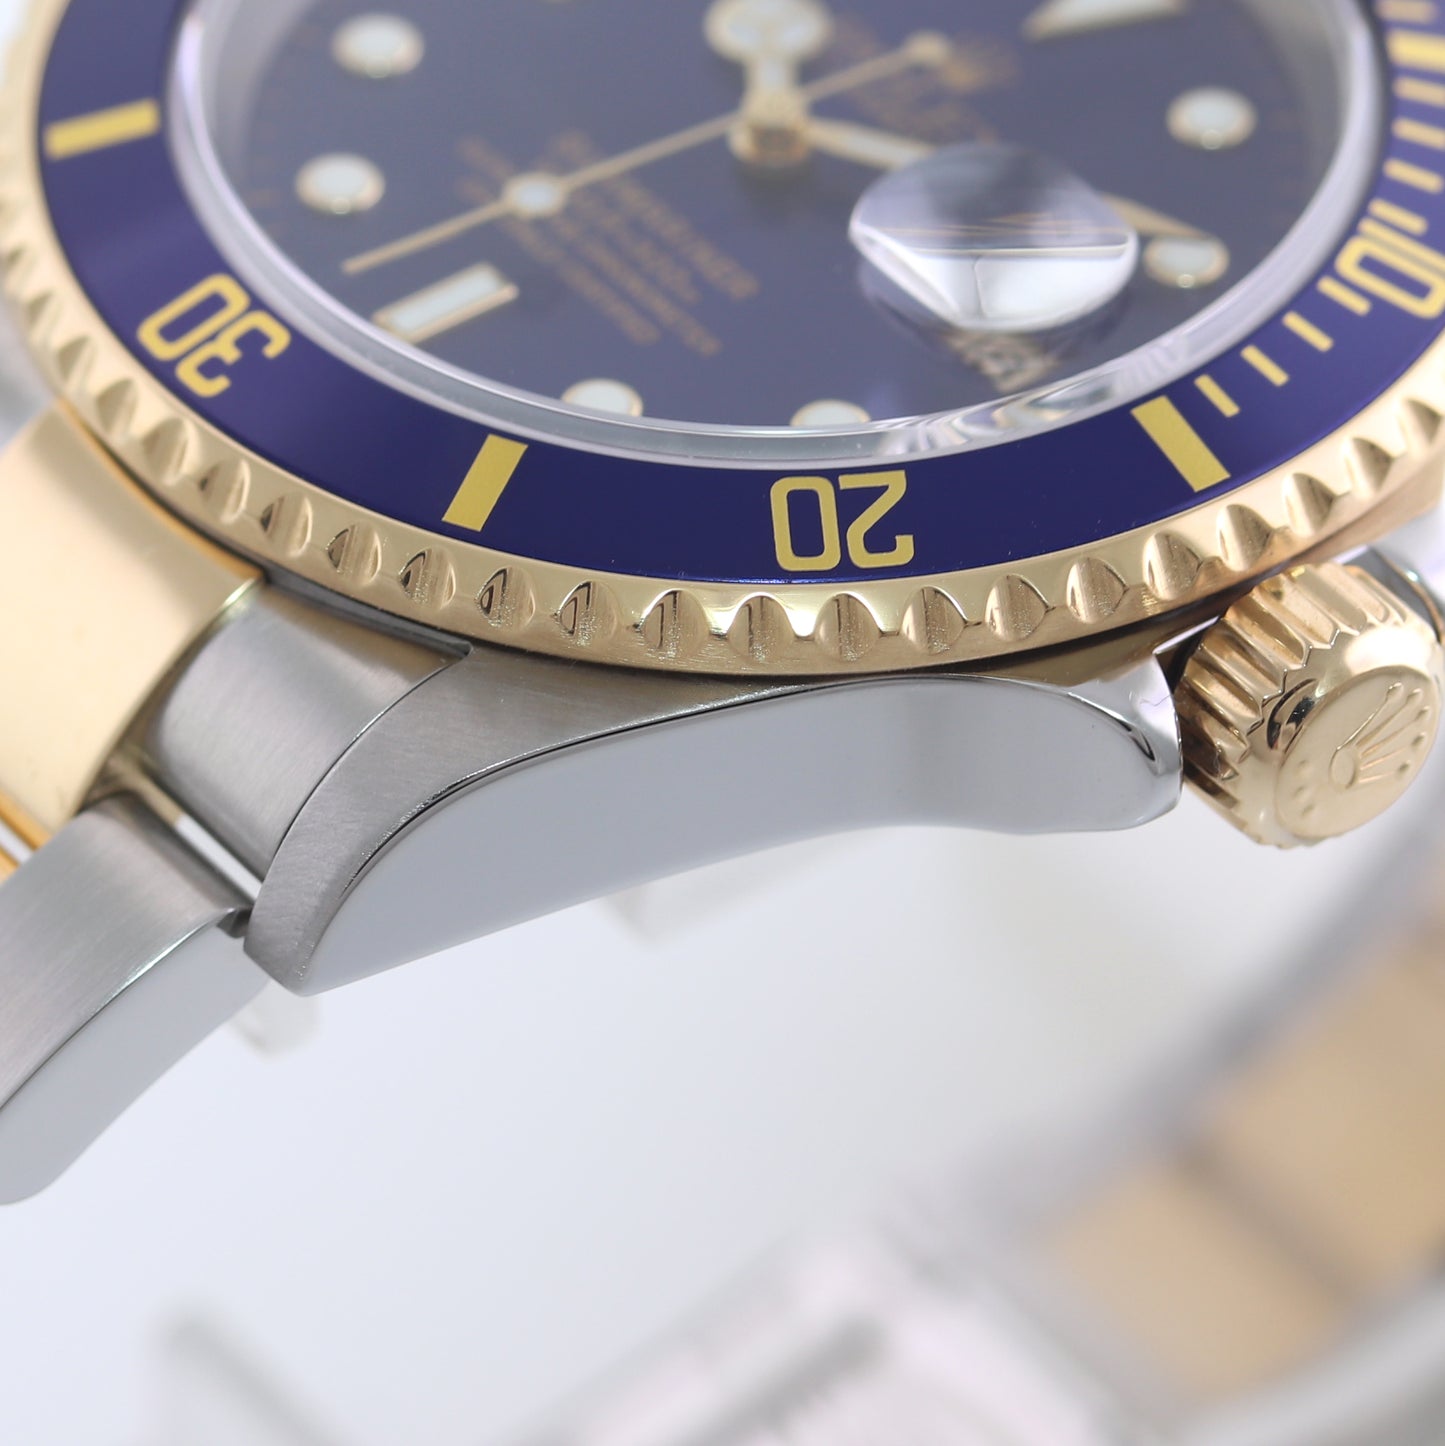 MINT 2004 PAPERS Rolex Submariner 16613 Gold Steel Two Tone Sunburst Blue Watch